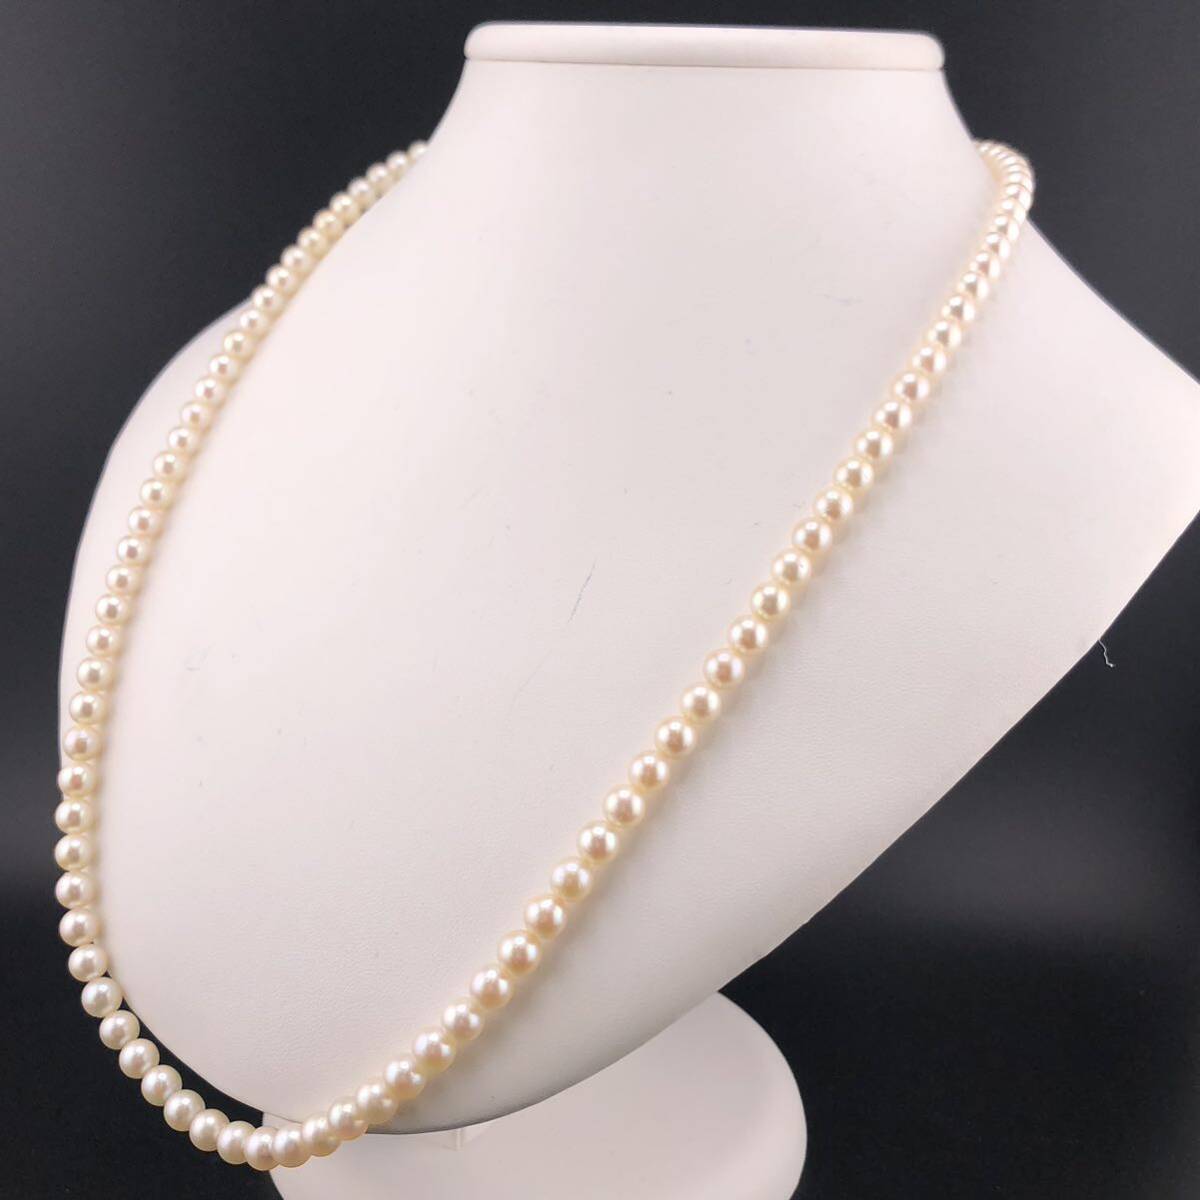 E04-1939☆☆ アコヤパールネックレス 6.0mm 61cm 35.4g ( アコヤ真珠 Pearl necklace SILVER )の画像2